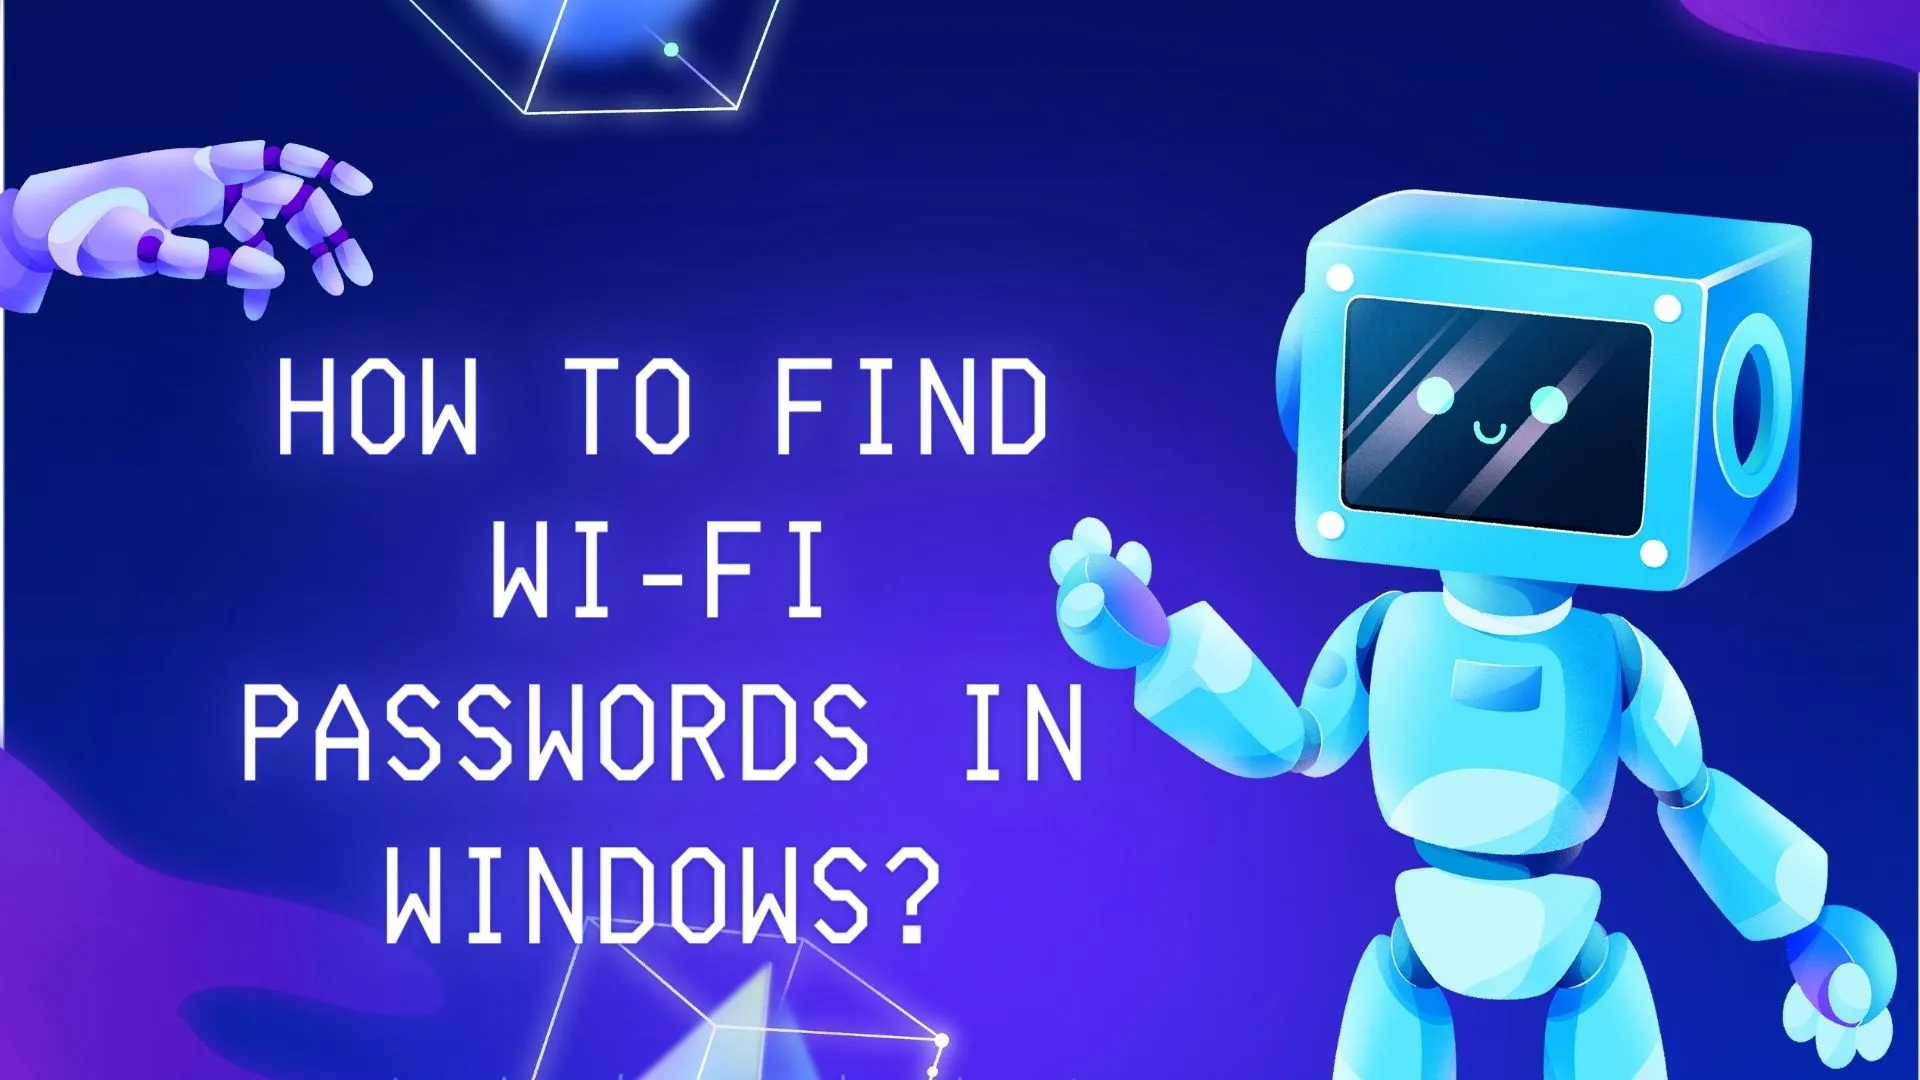 How to Find Wi-Fi Passwords in Windows